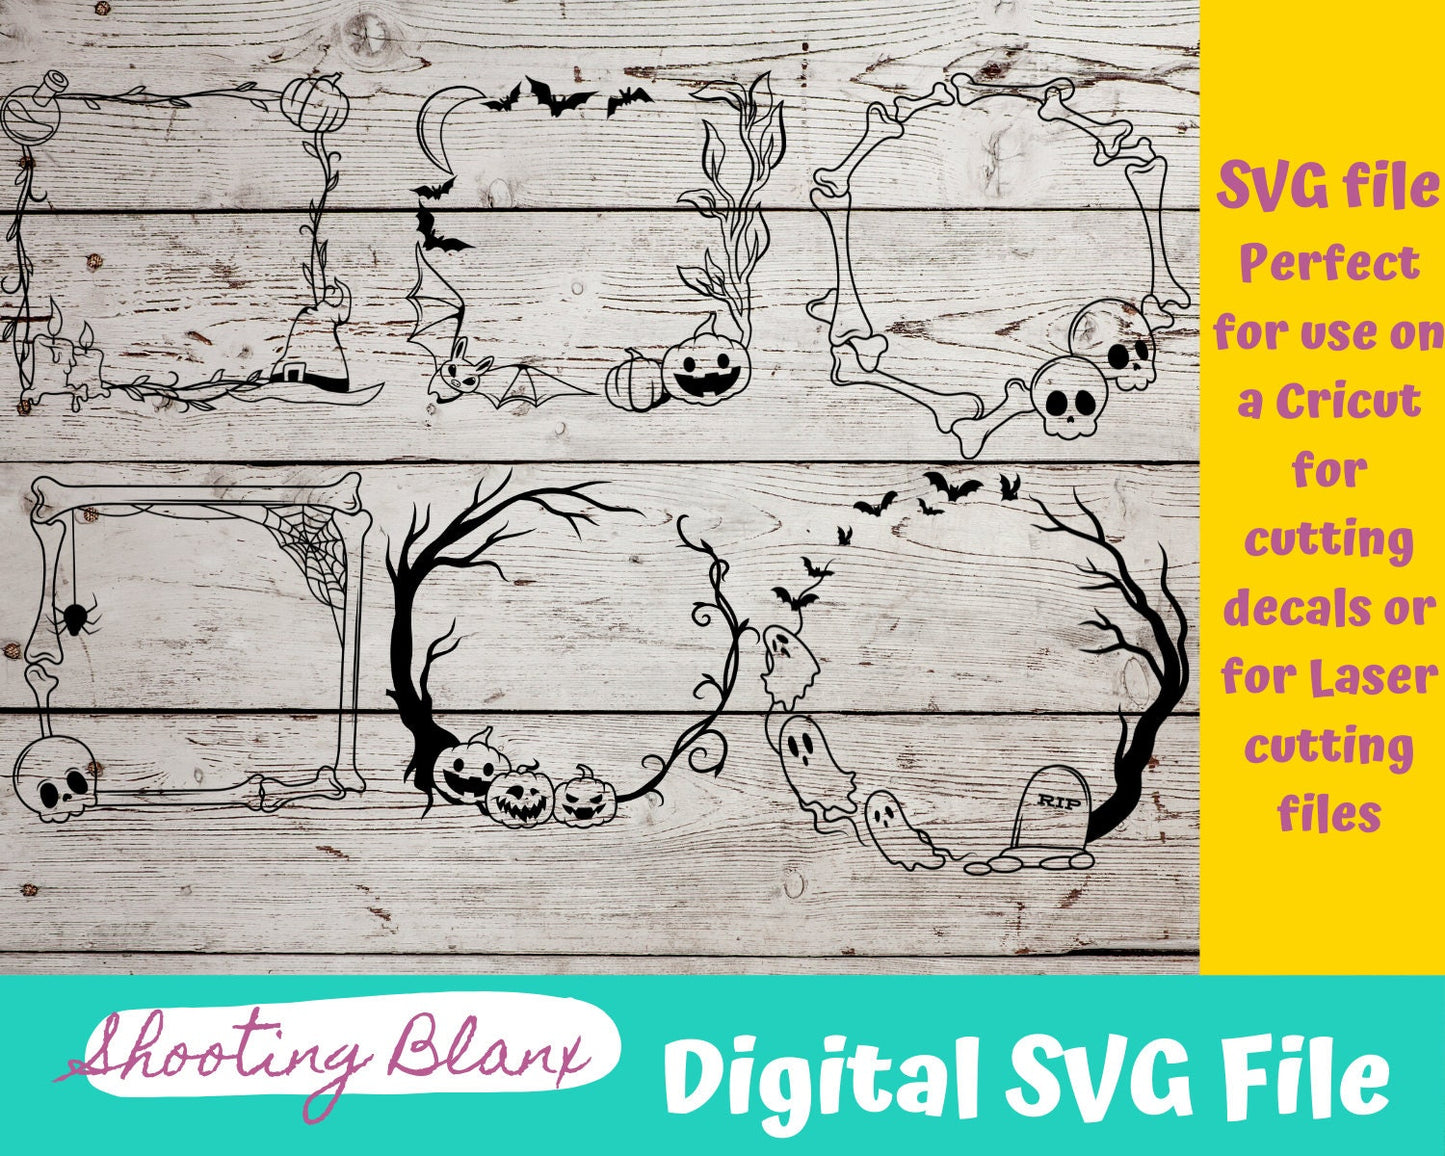 Halloween Frame bundle SVG files perfect for Cricut, Cameo, or Silhouette also for laser engraving Glowforge, horror, spooky, door wreath